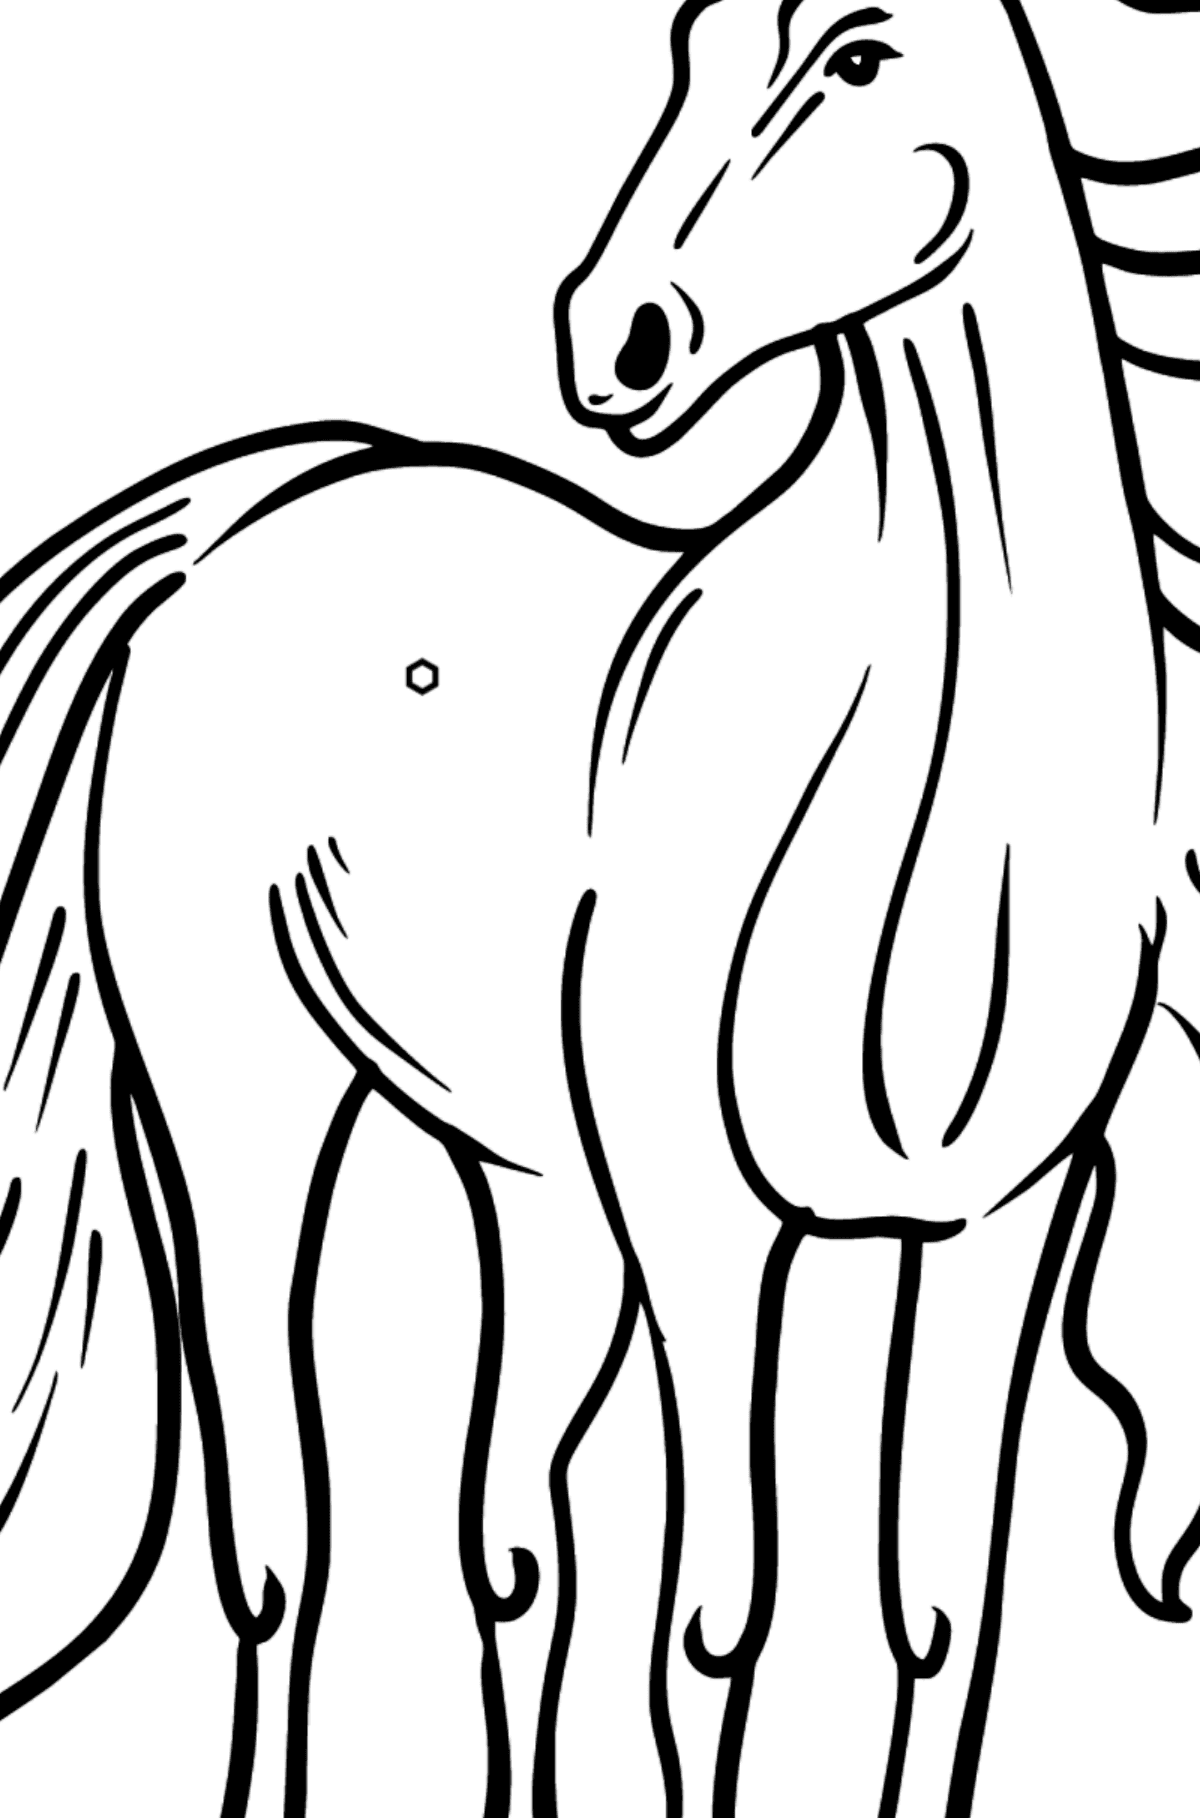 Horse coloring page - Coloring by Geometric Shapes for Kids